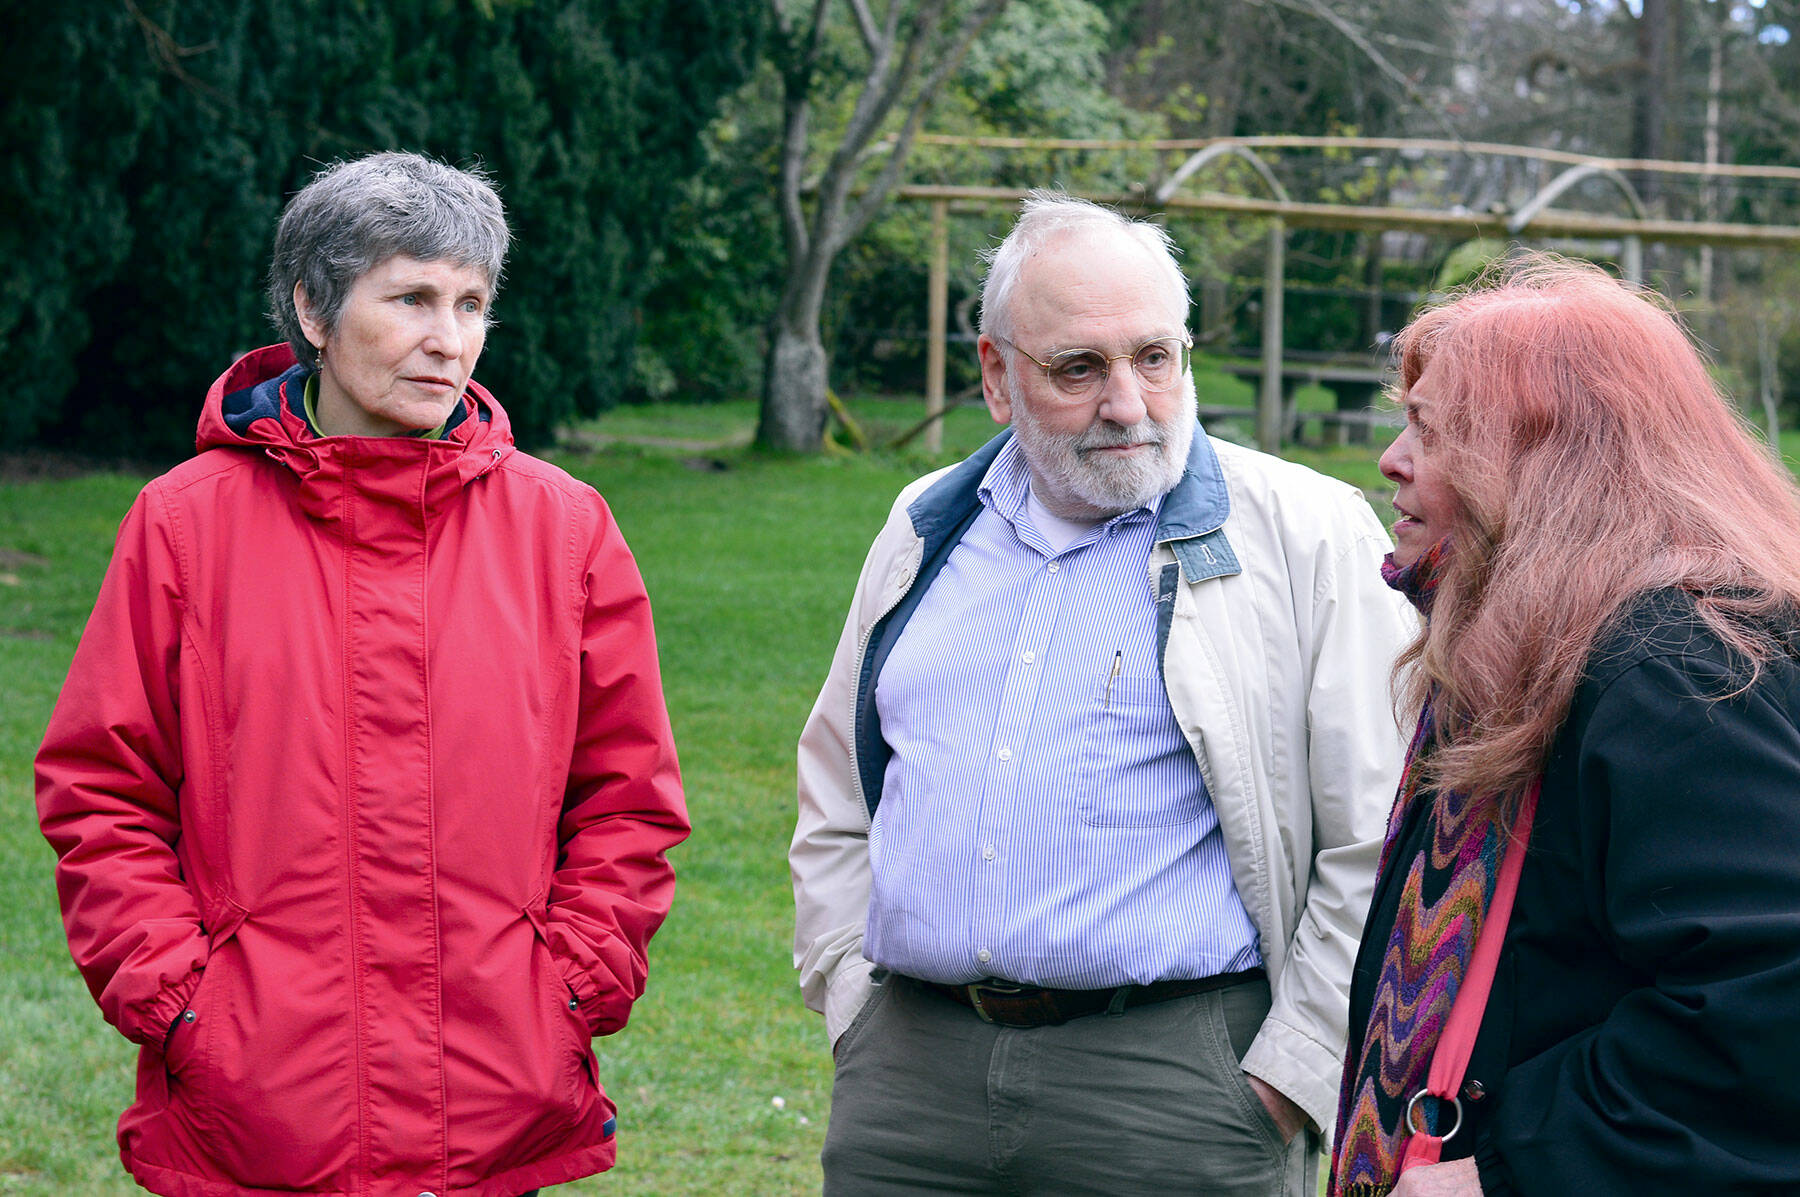 Jean Walat, left, Larry Jensen and Ruth Asare are members of Jefferson County Immigrant Rights Advocates, which has established a sponsor circle to help three Afghan refugees resettle in Port Townsend. (Diane Urbani de la Paz/Peninsula Daily News)